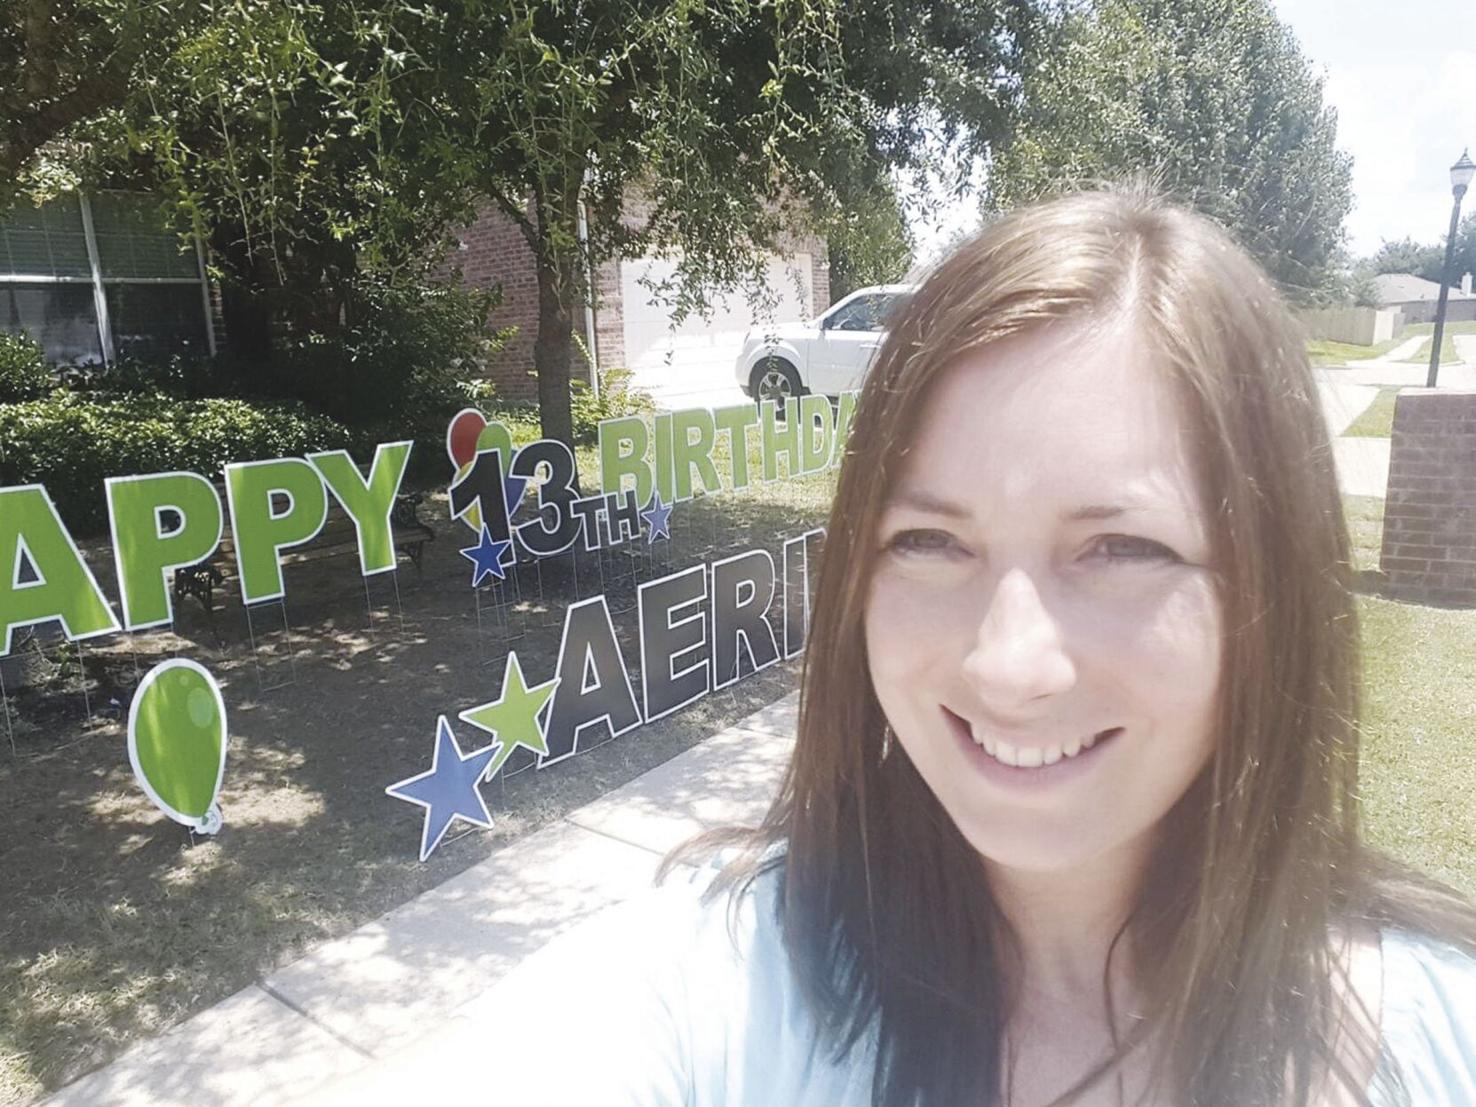 Greenville, TX: ‘Gypsies’ owner brings delight throughout county with yard sign greetings